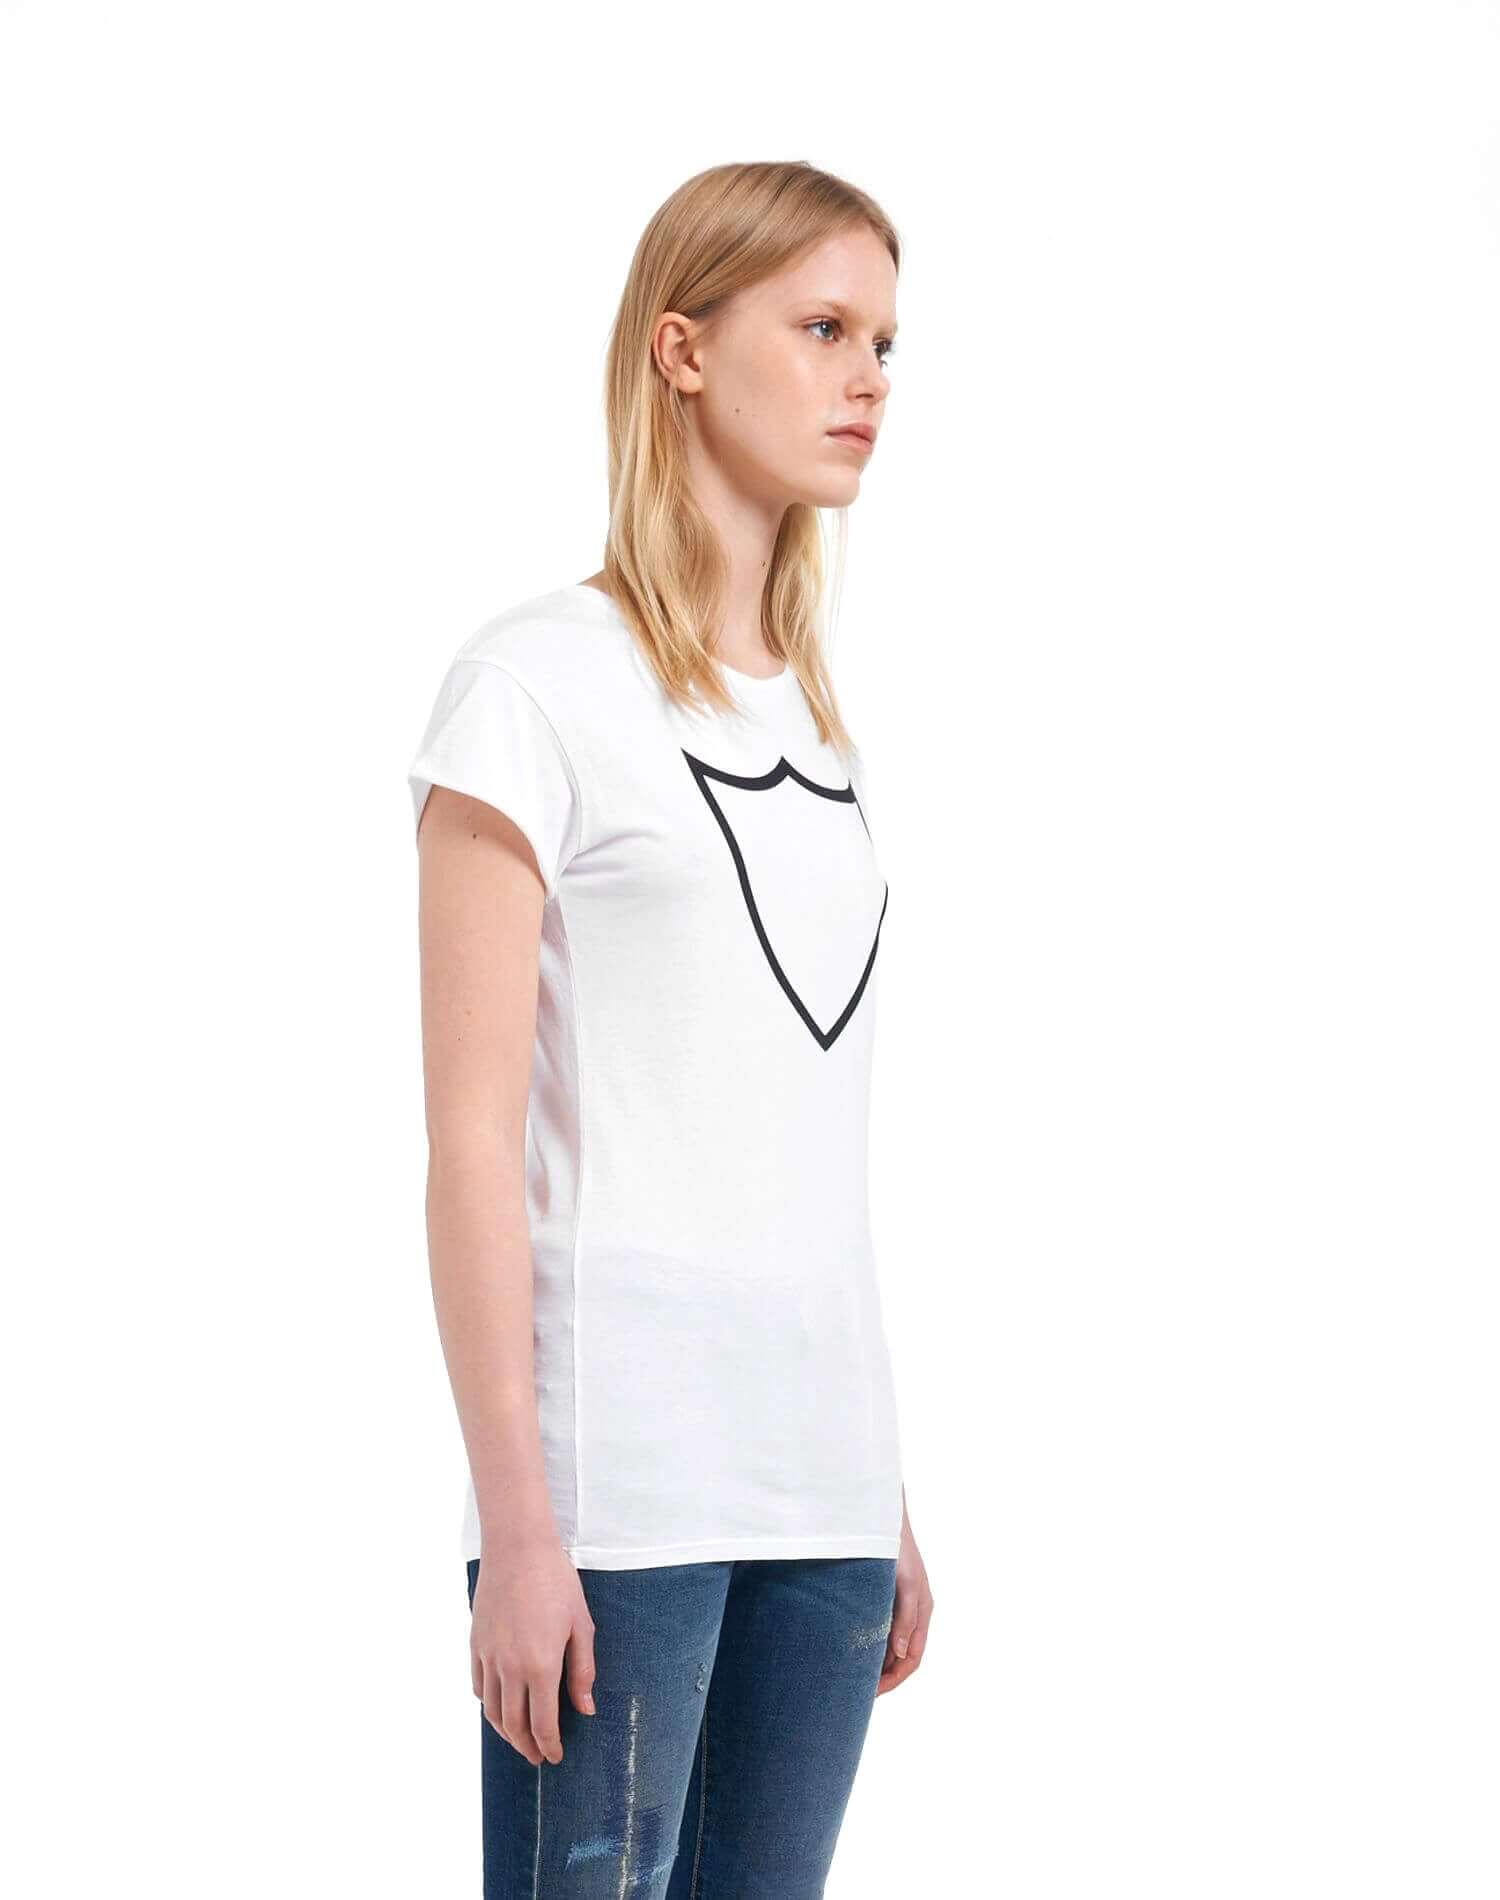 HTC BASIC T-SHIRT WOMAN White cotton t-shirt with black HTC Los Angeles shield logo printed on the front. HTC LOS ANGELES